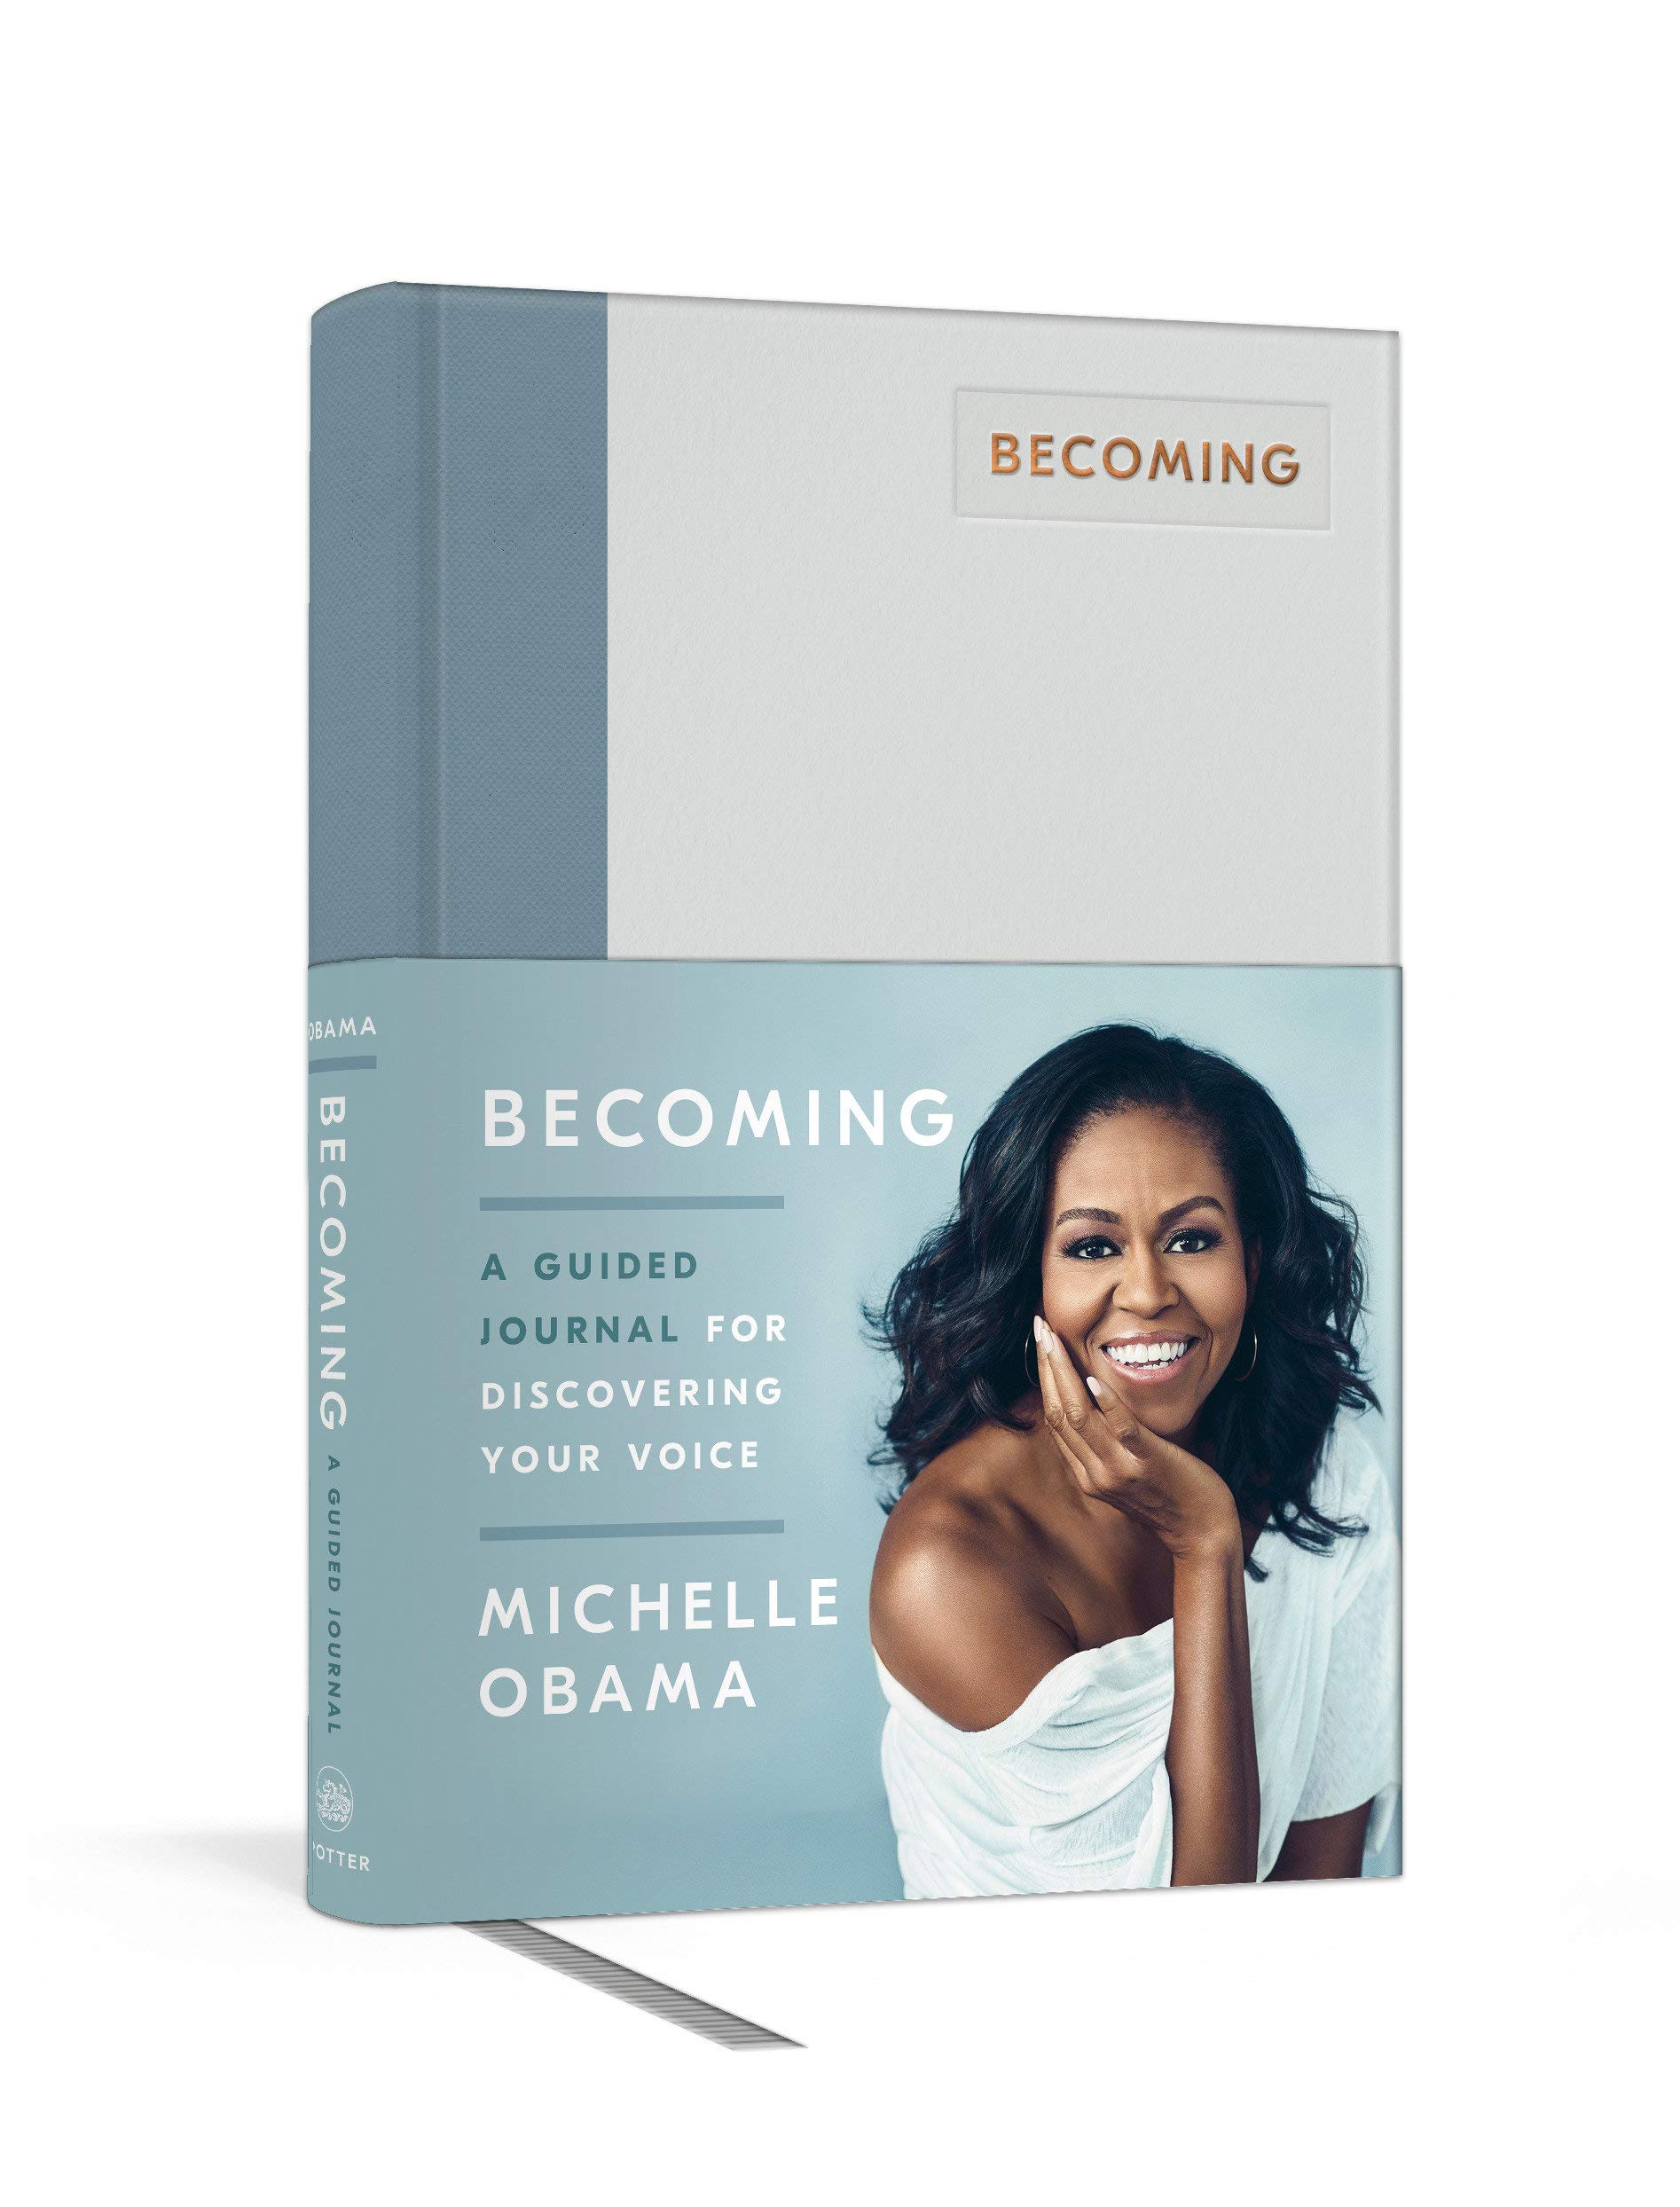 Becoming: A Guided Journal for Discovering Your Voice by Michelle Obama (Hardcover) $8.39 + Free Shipping w/ Prime or Orders $25+